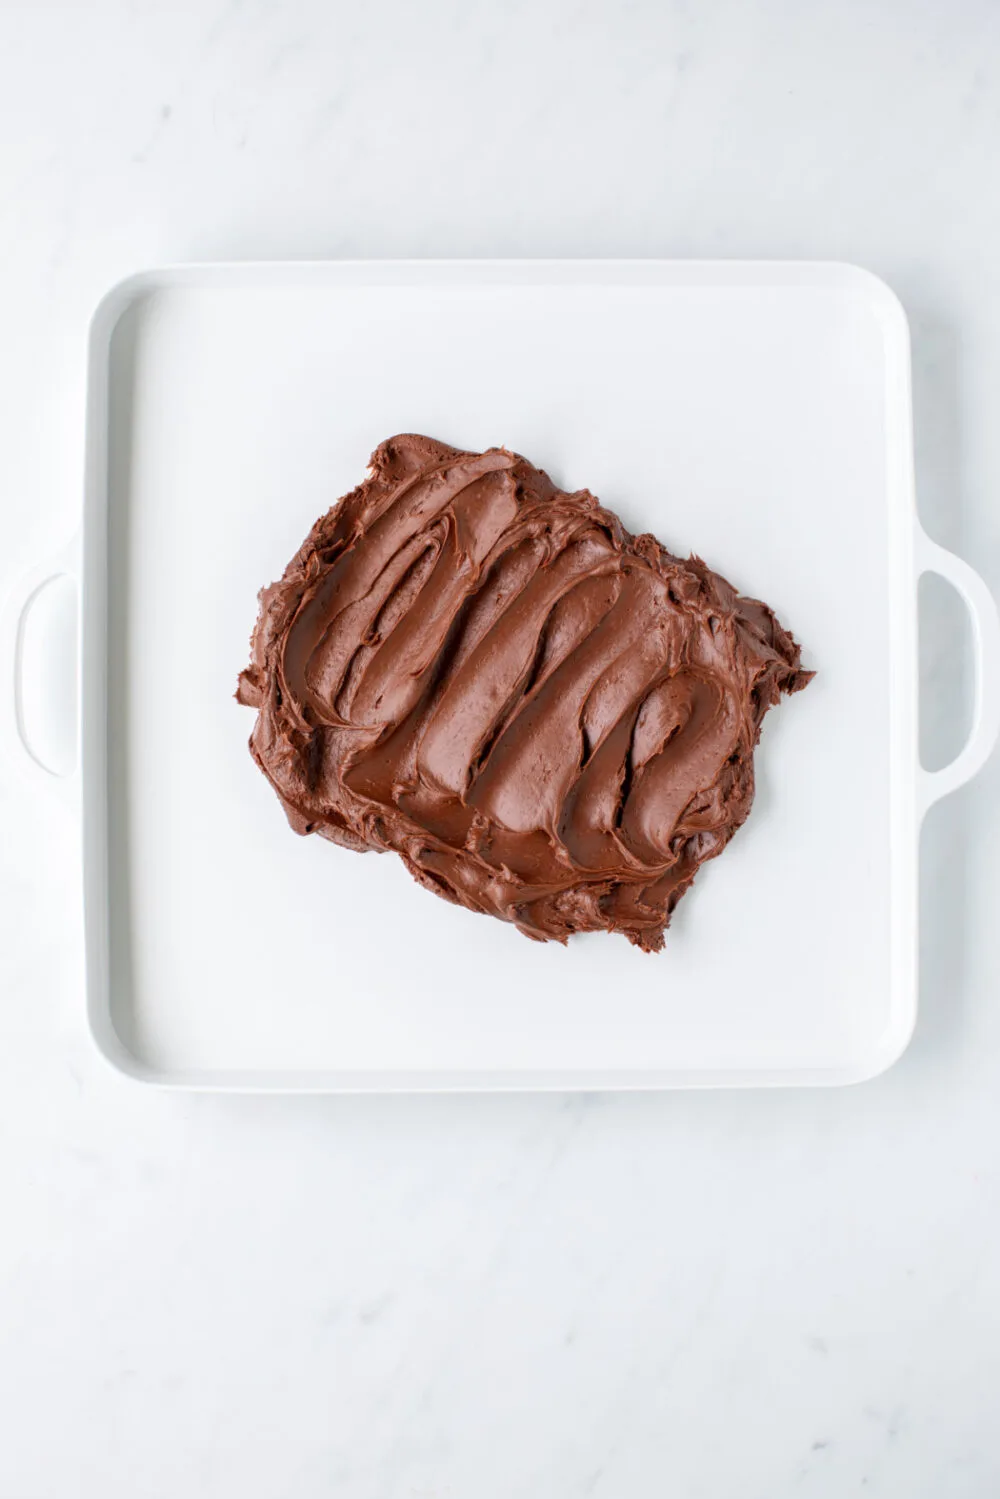 Spreading chocolate frosting on a white square serving tray.